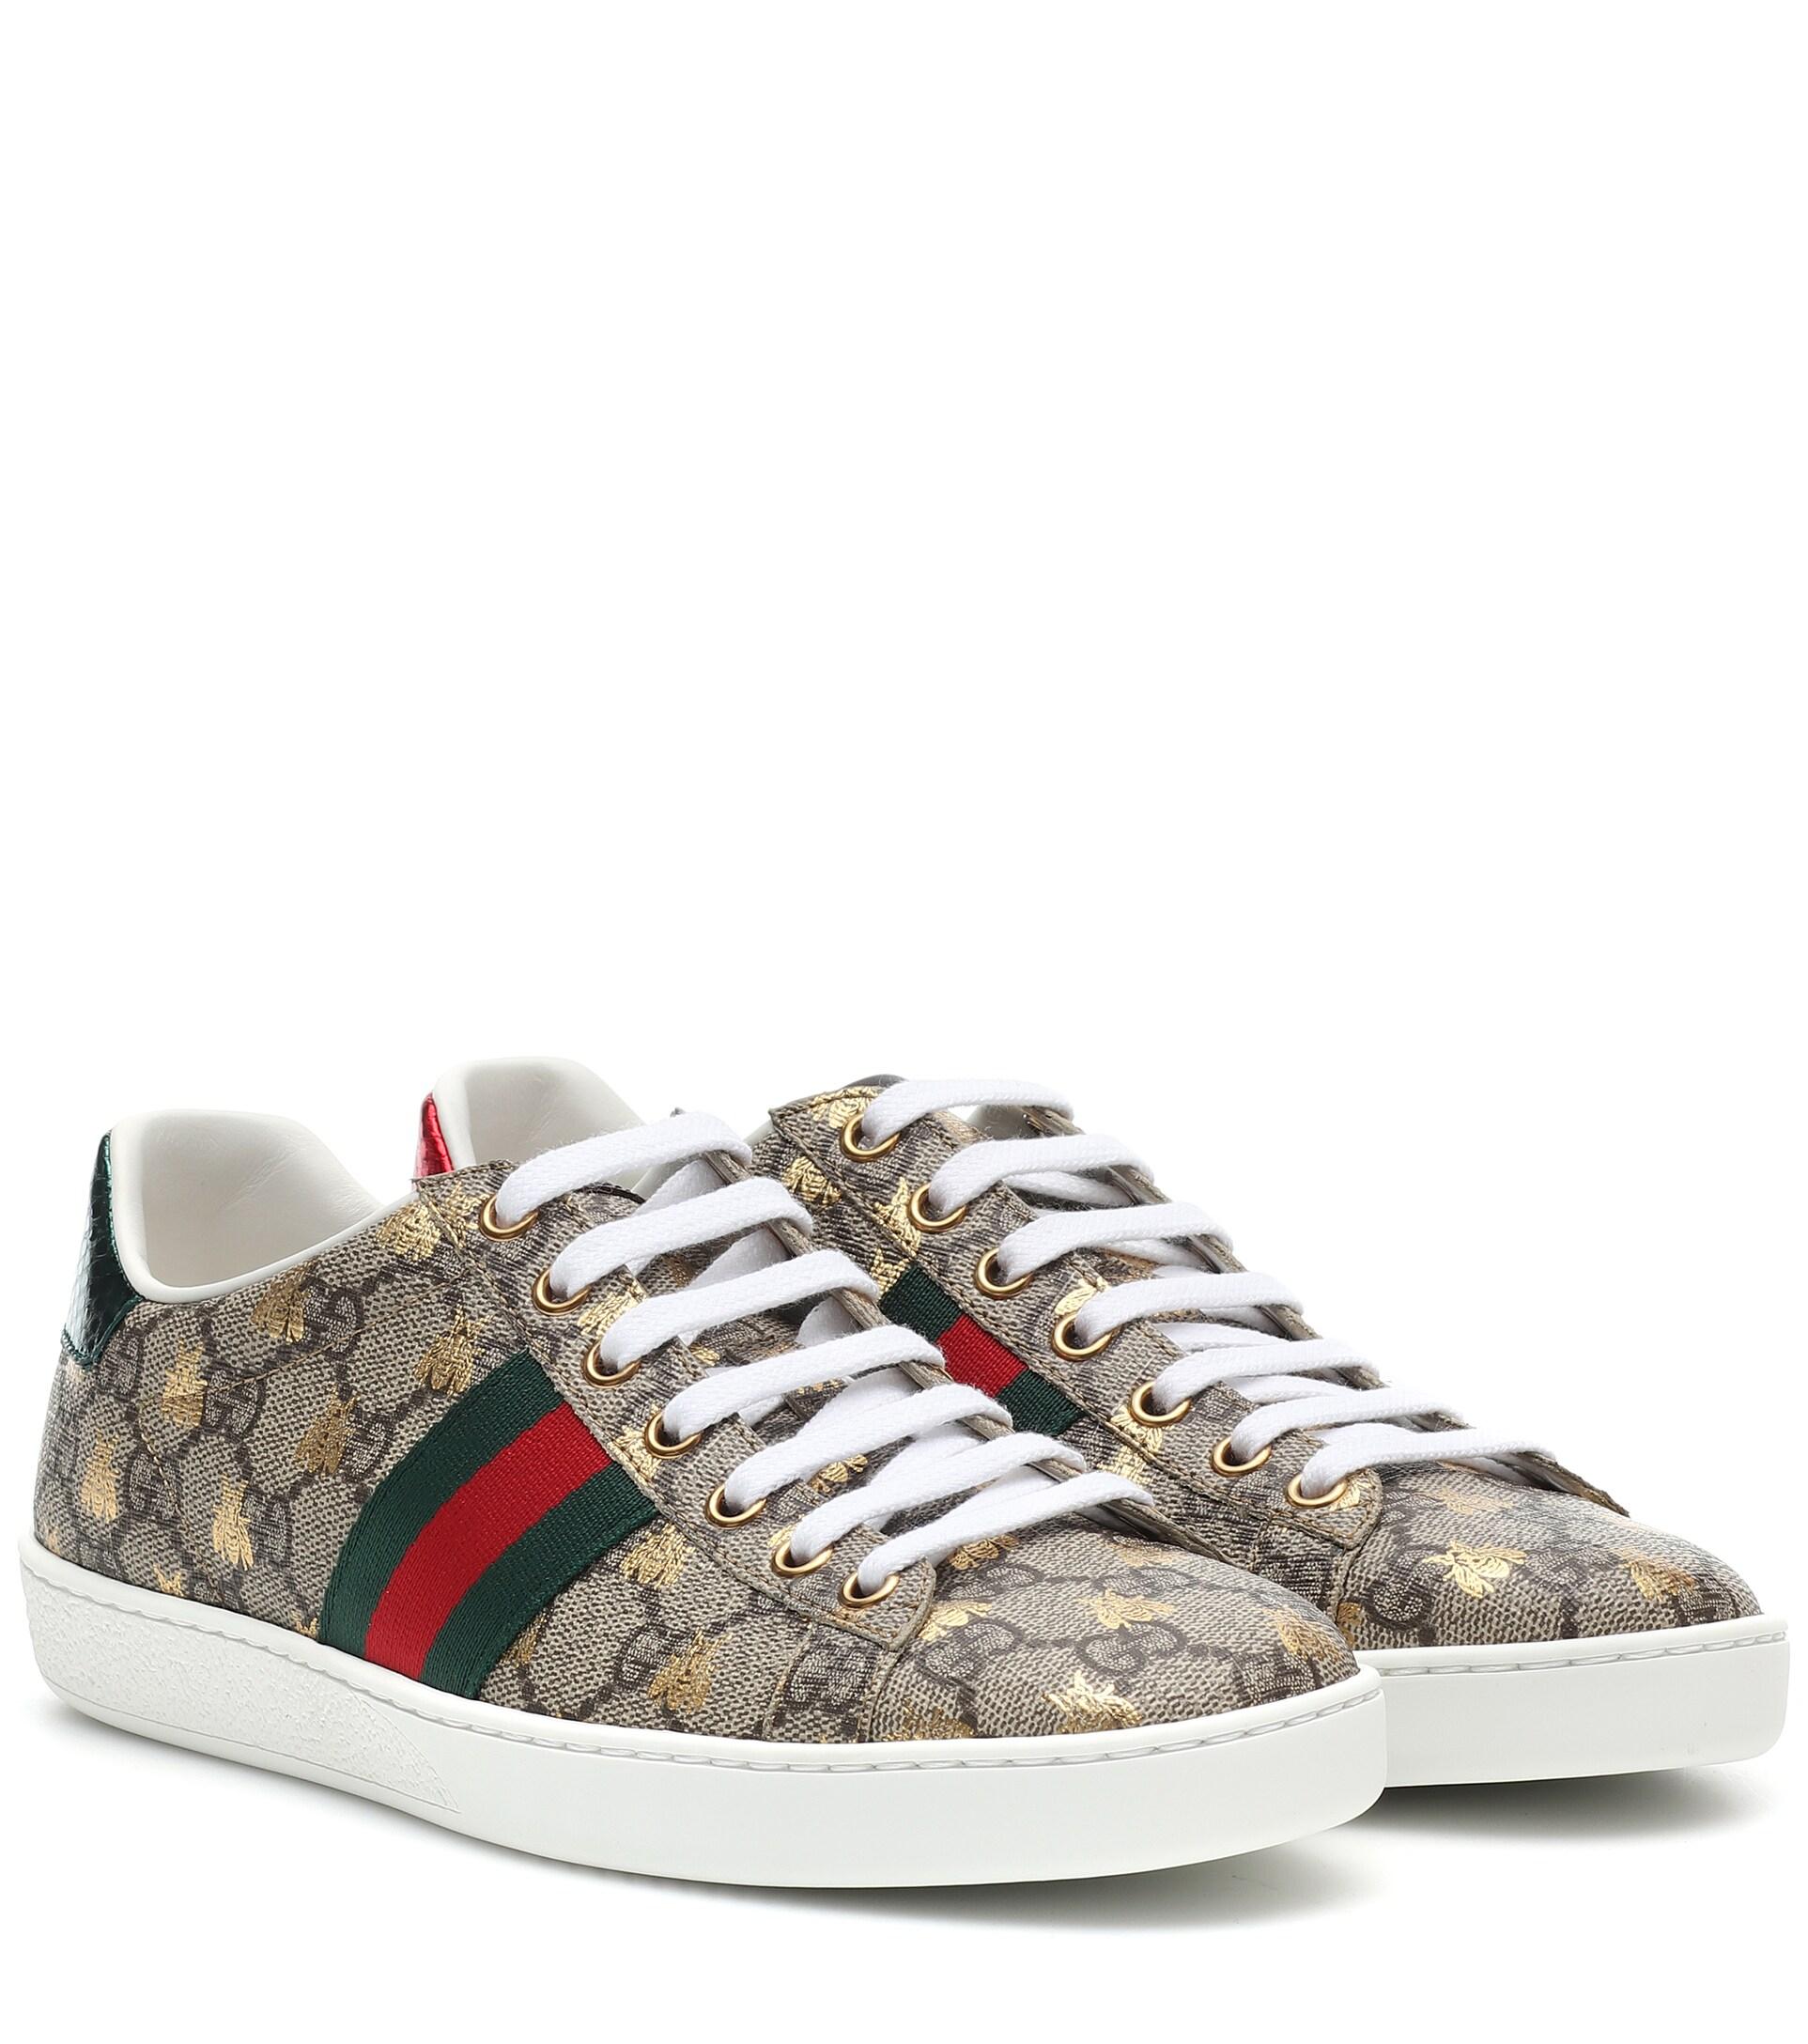 Gucci Ace Canvas Printed Sneakers Brown |